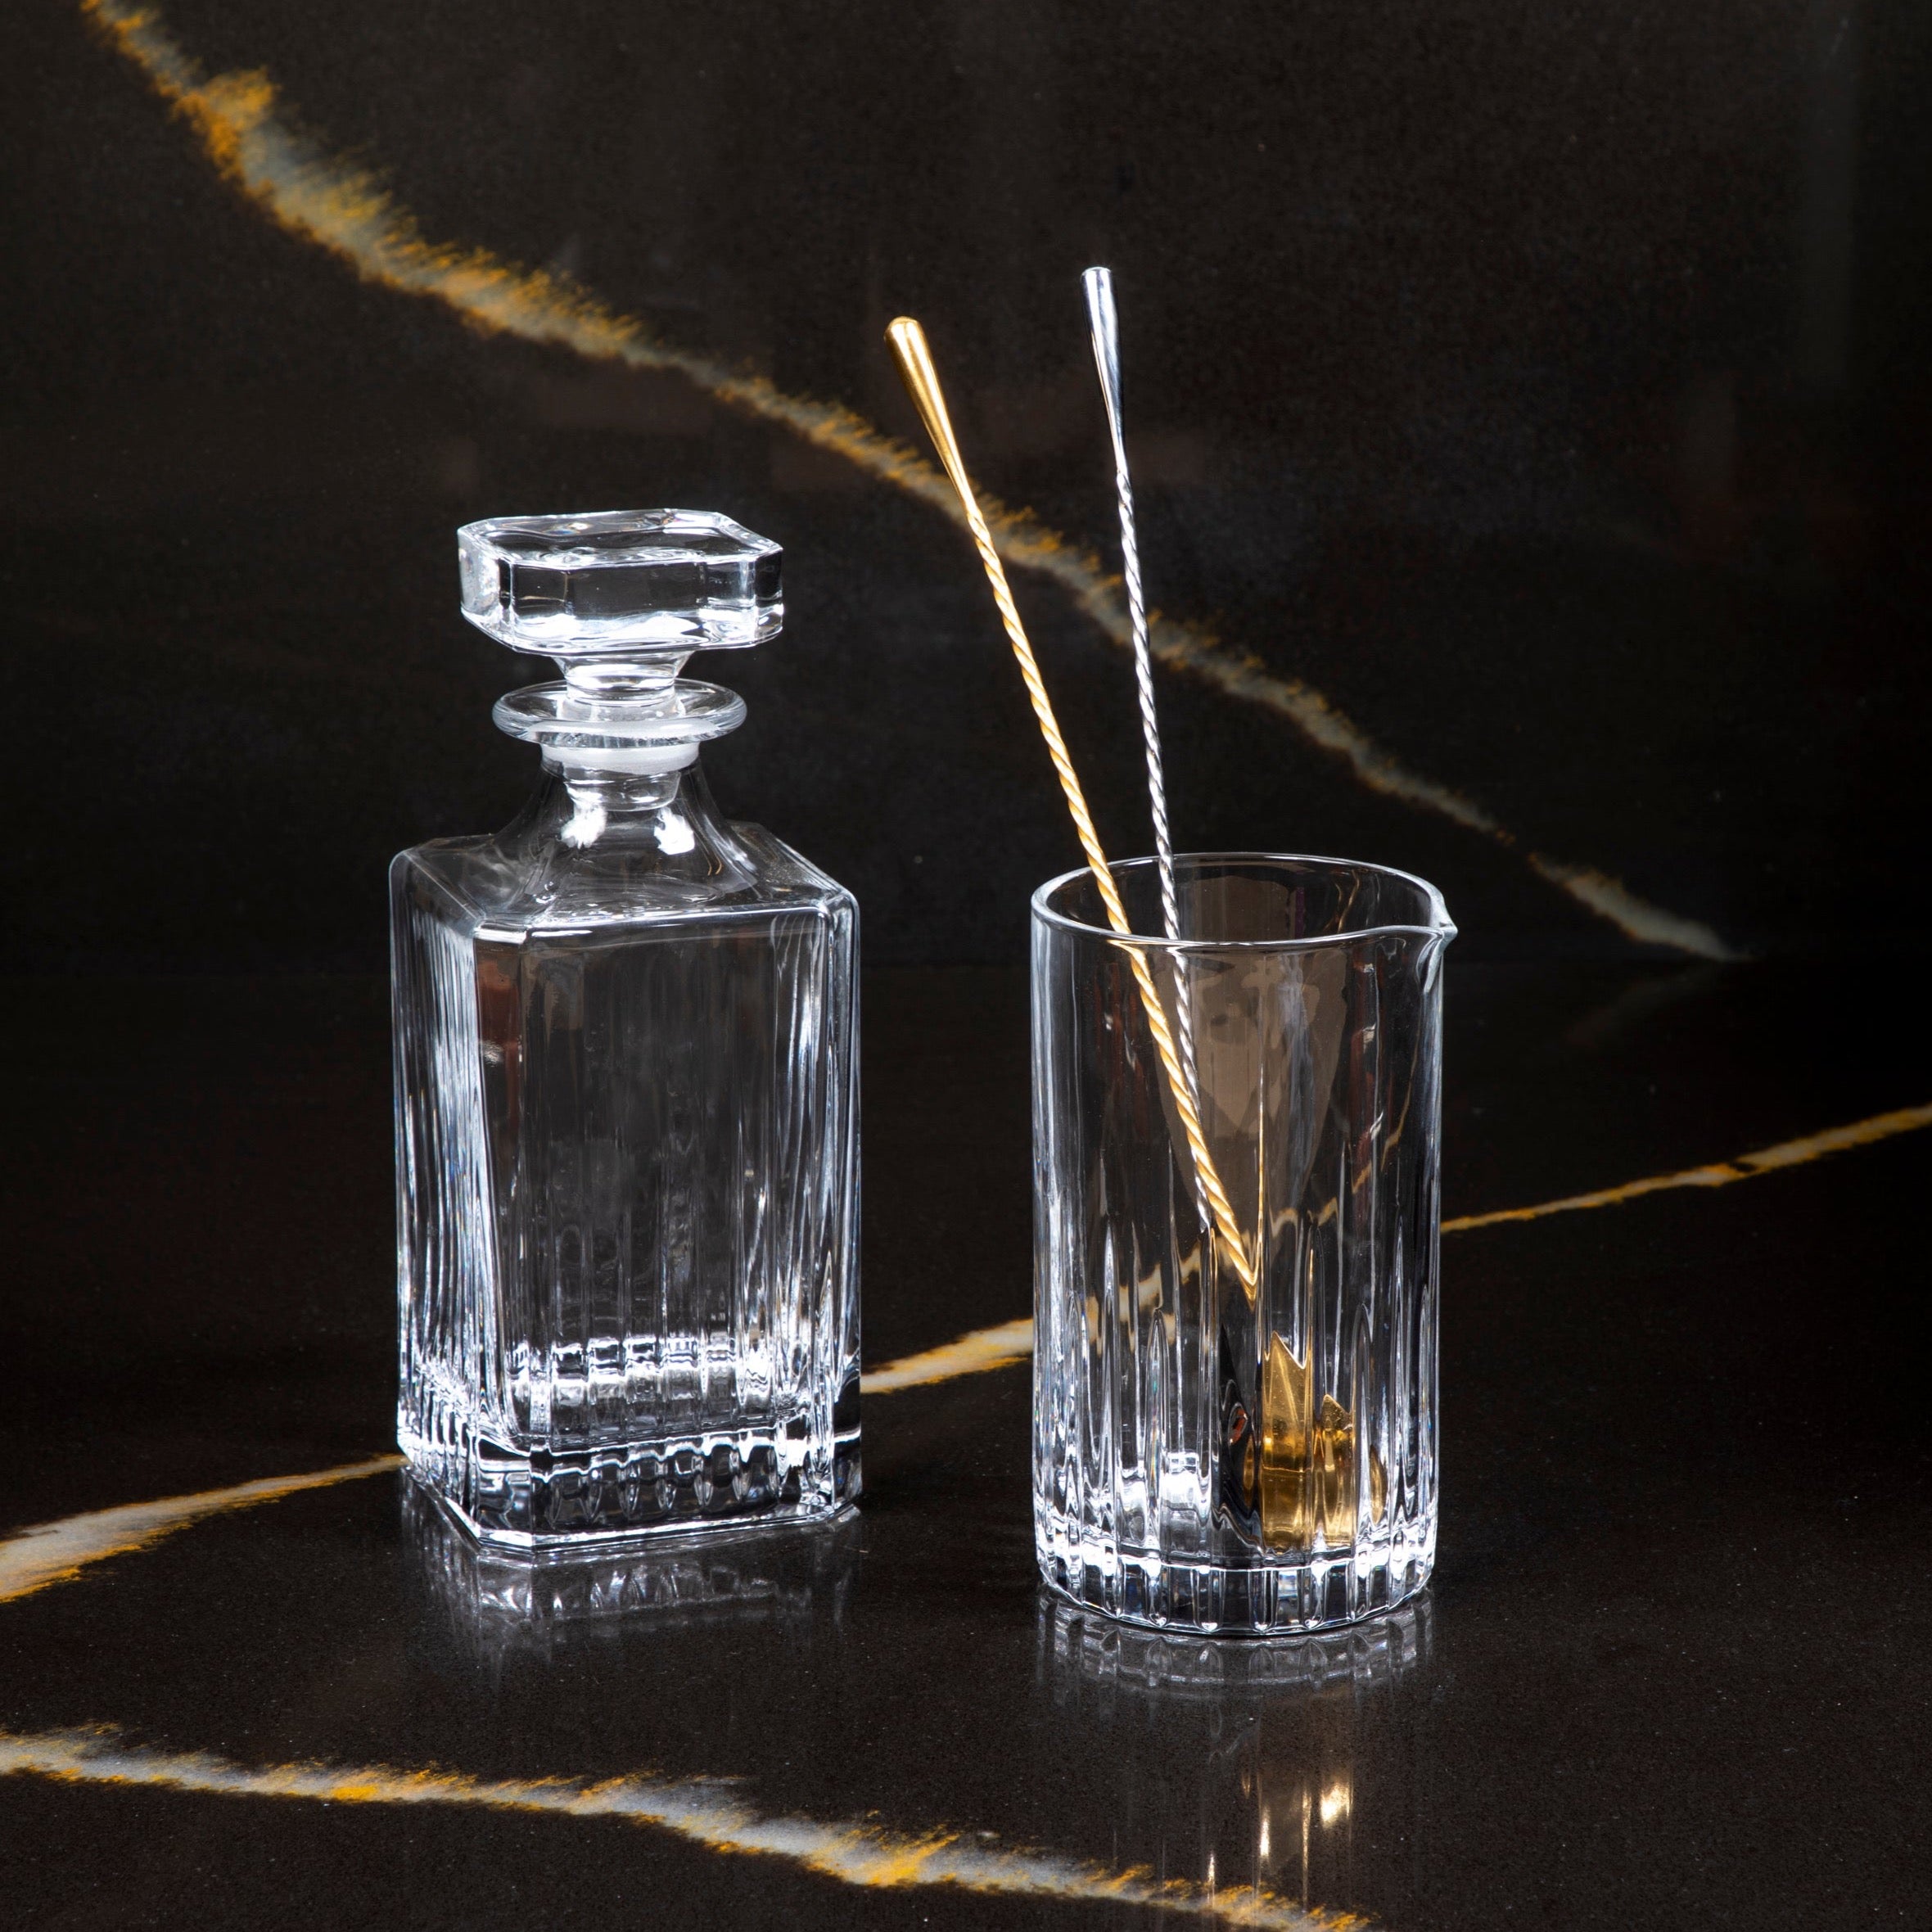 Timeless Crystal Decanter with Stopper